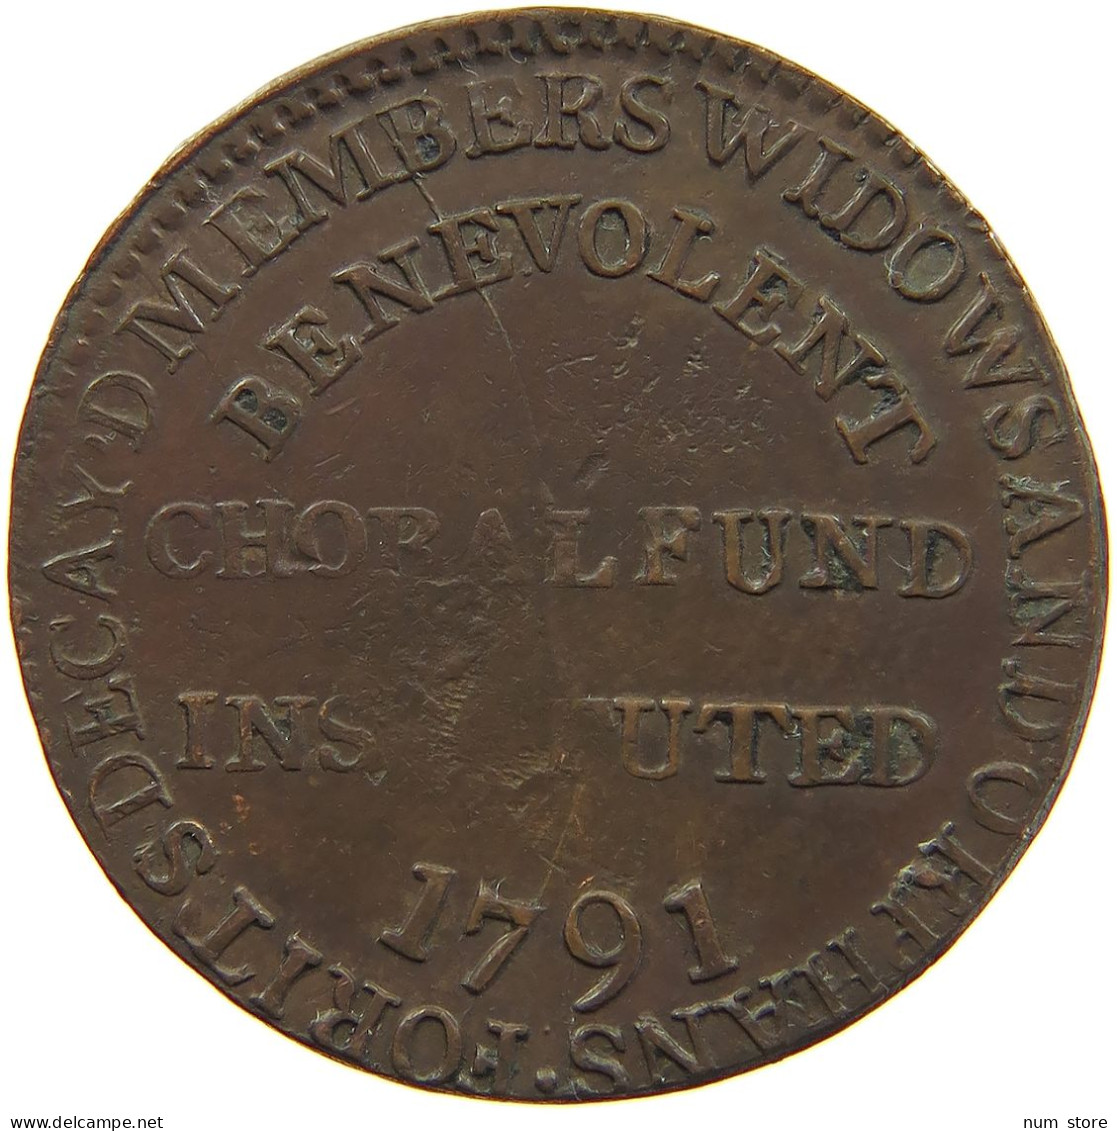 GREAT BRITAIN HALFPENNY 1791 GEORGE III. 1760-1820 MIDDLESEX WIDOWS ORPHANS #t138 0049 - B. 1/2 Penny